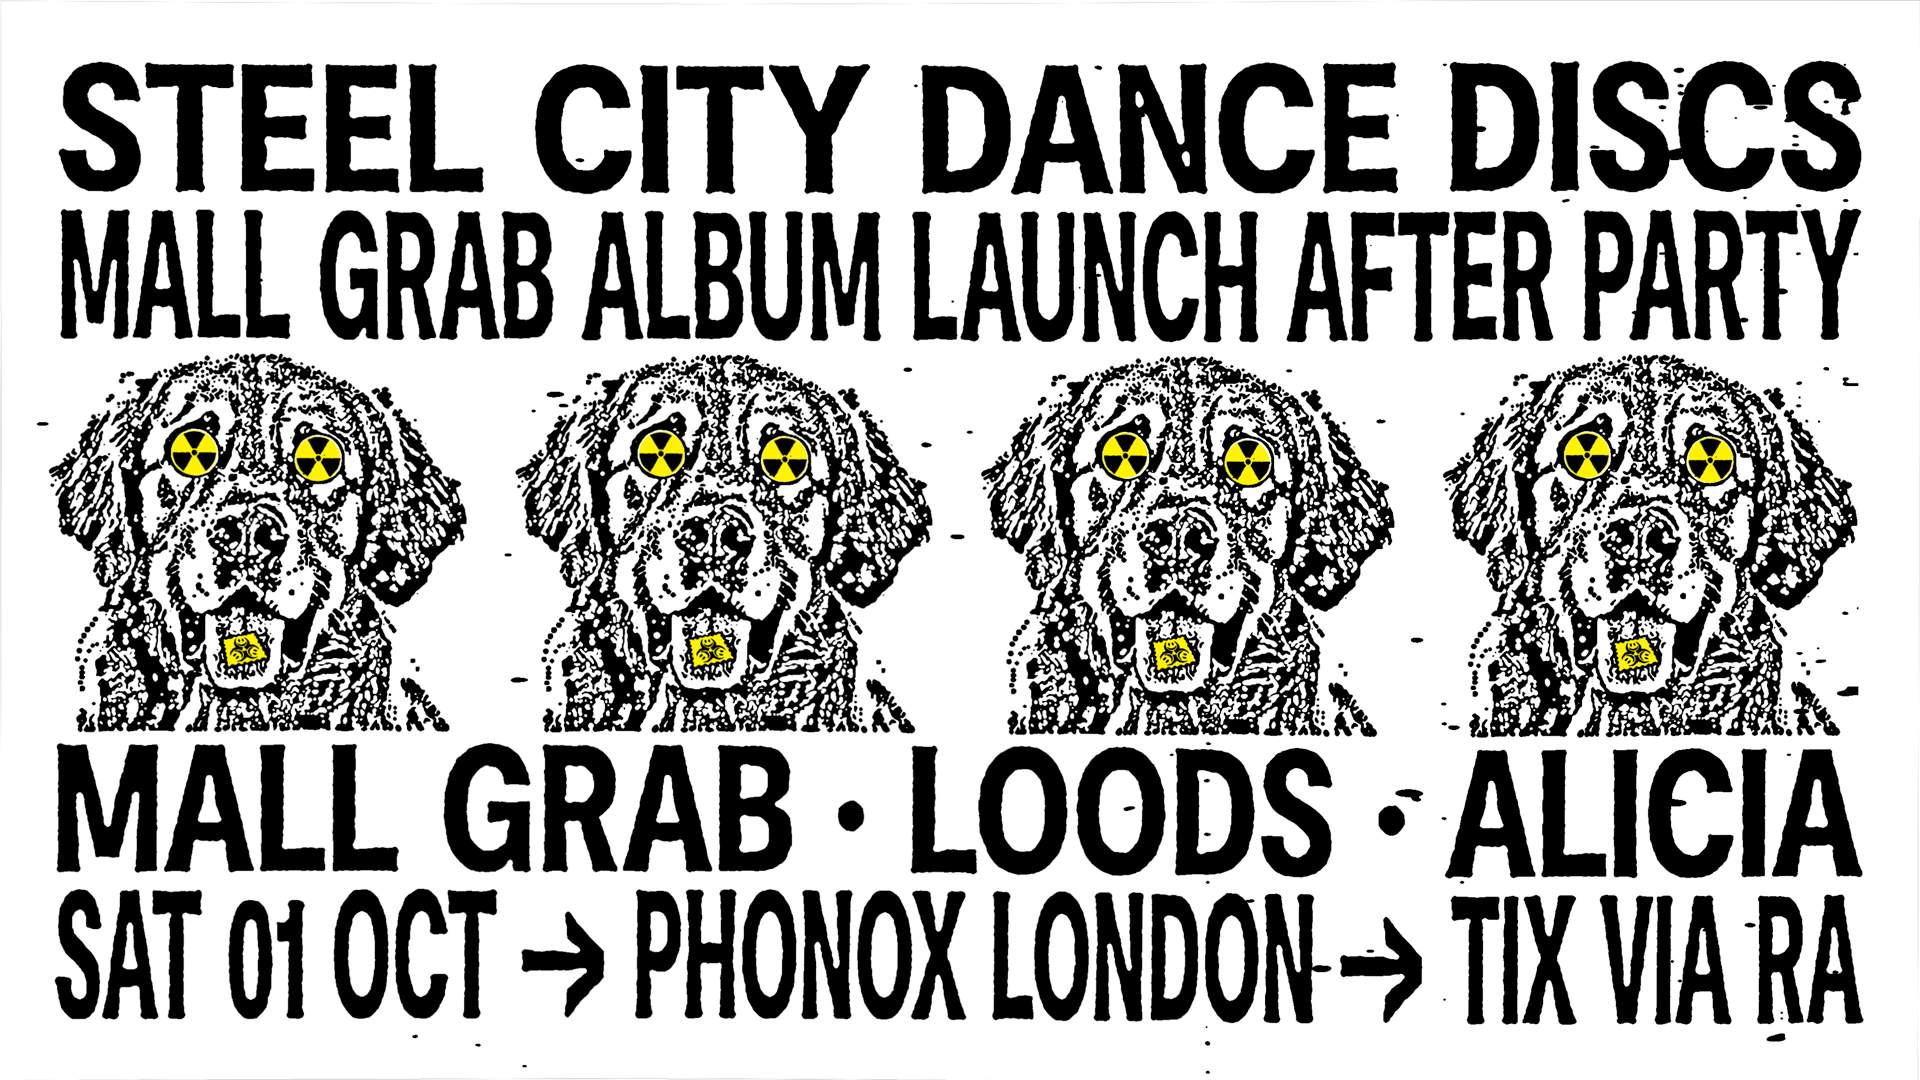 Steel City Dance Discs [S.C.D.D] with Mall Grab, Loods, Alicia (Album Launch Afters) - フライヤー表